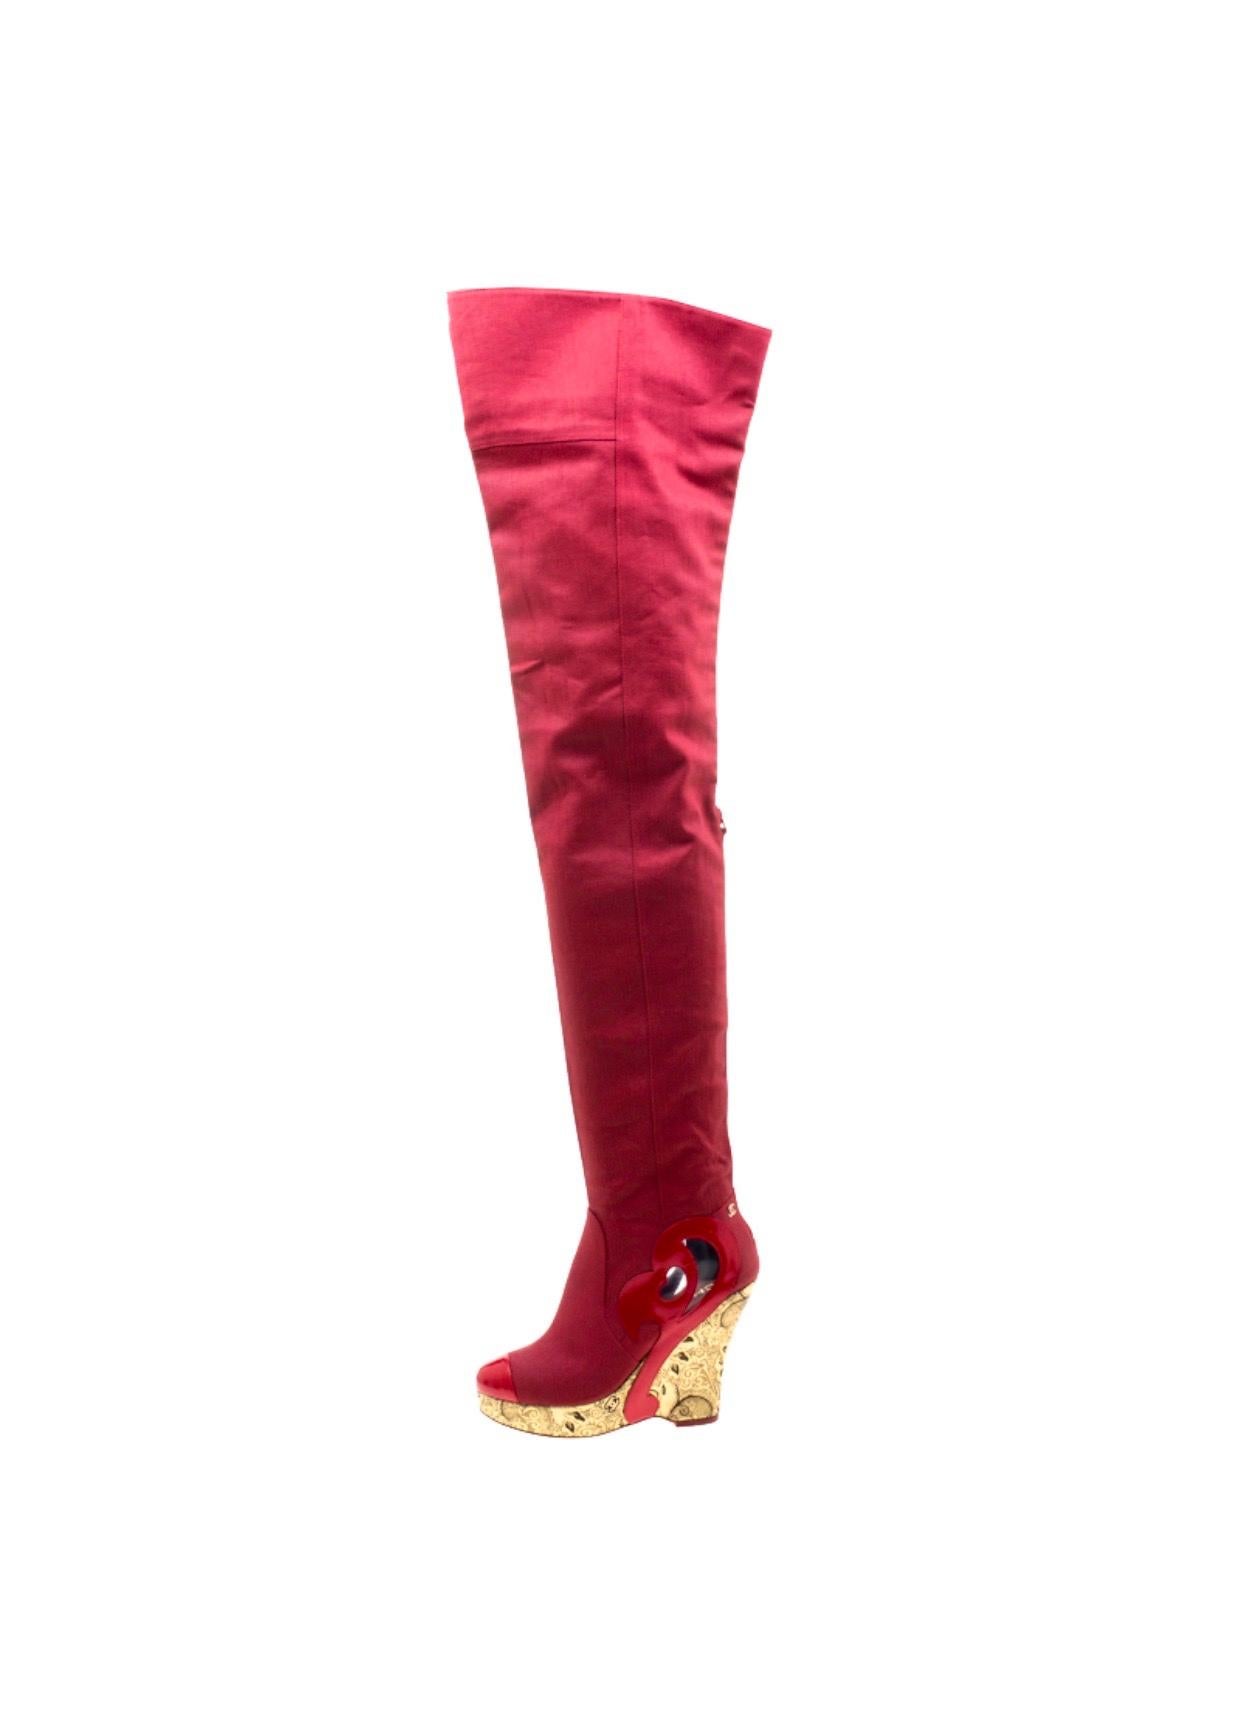 Unique Chanel Thigh High Boots
Collector's Item 
Sold Out Immediately

A Chanel classic signature piece that will last you for years
Made of soft red fabric that fits your legs like a second skin
Thigh-high boots - match it with a leggings, hot